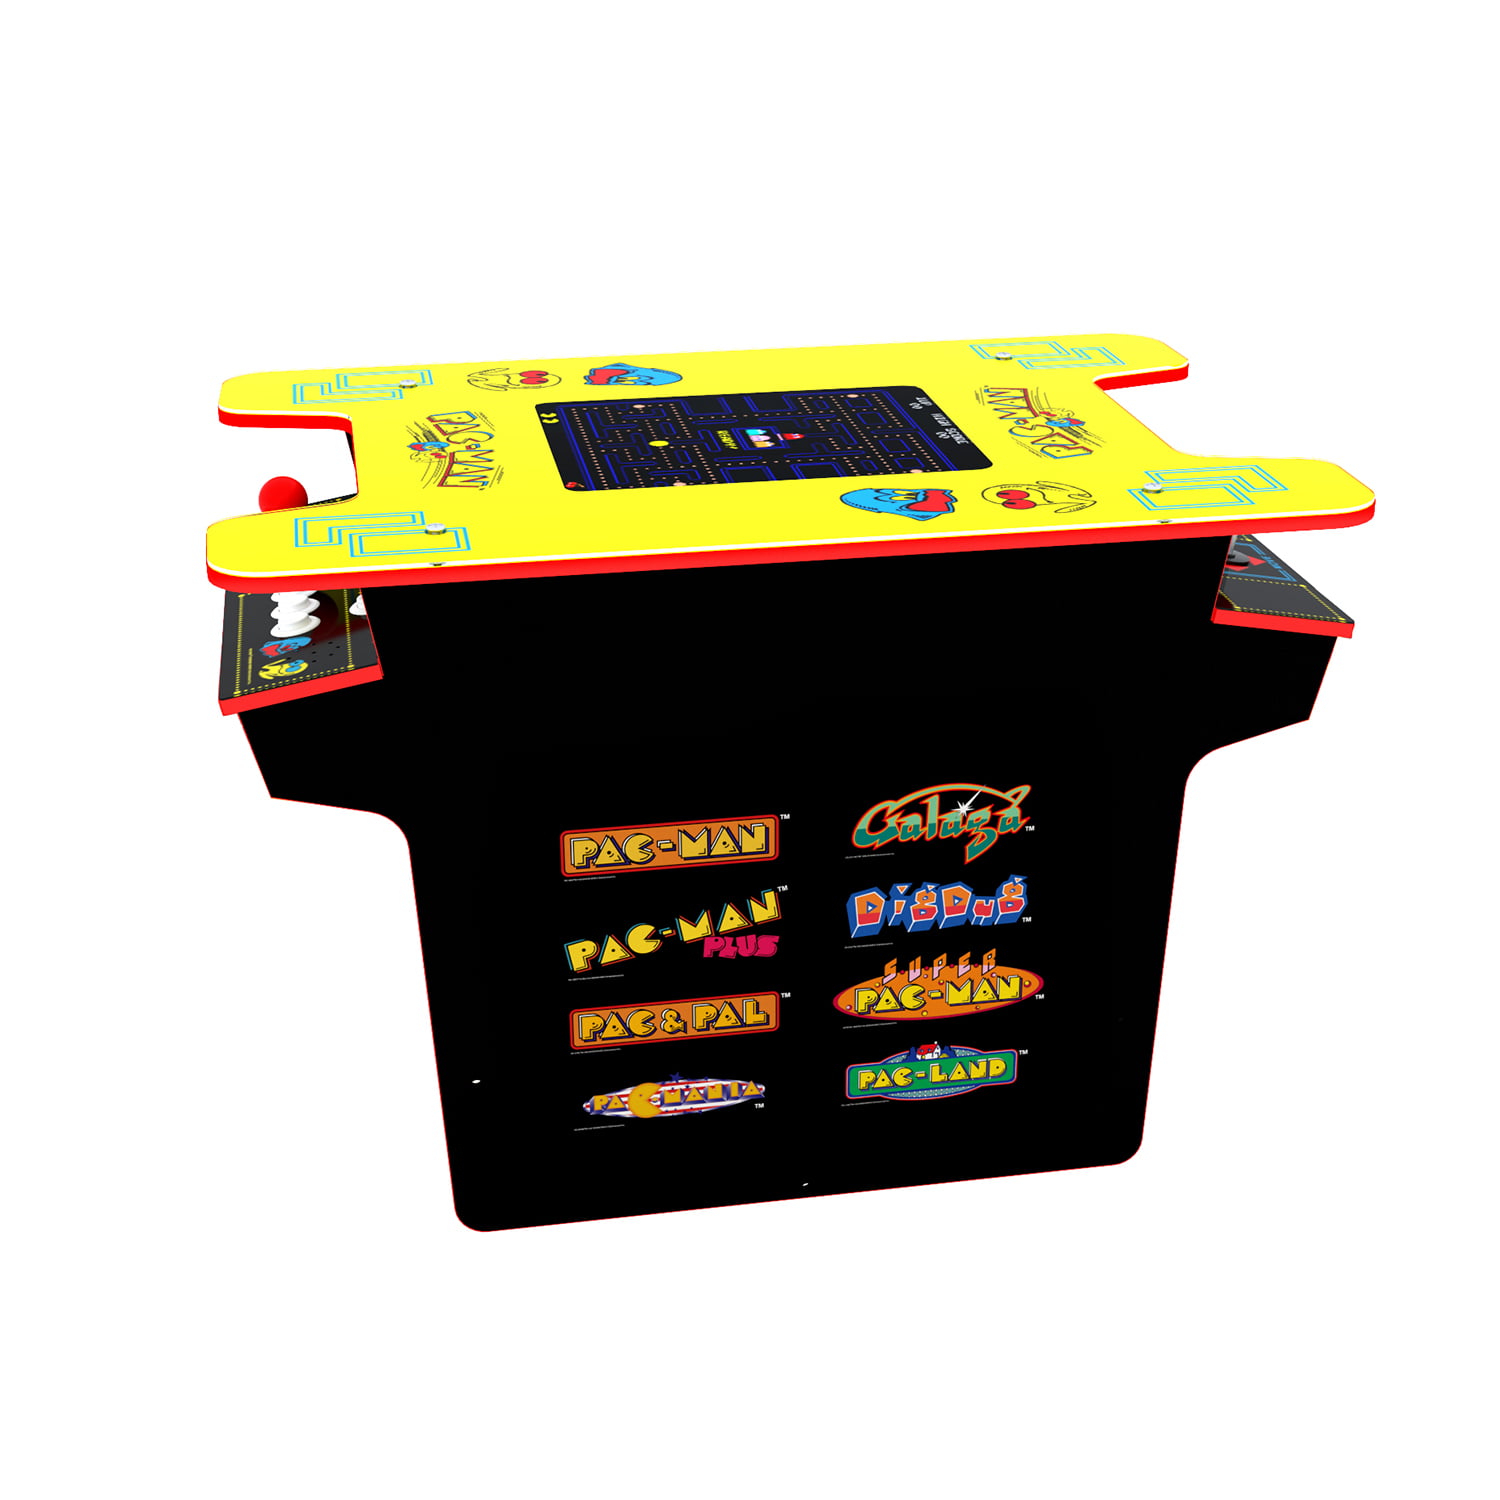 Pac Man Galaga Head To Head Gaming Table Arcade1up Walmart - chased by pac man ghosts roblox youtube